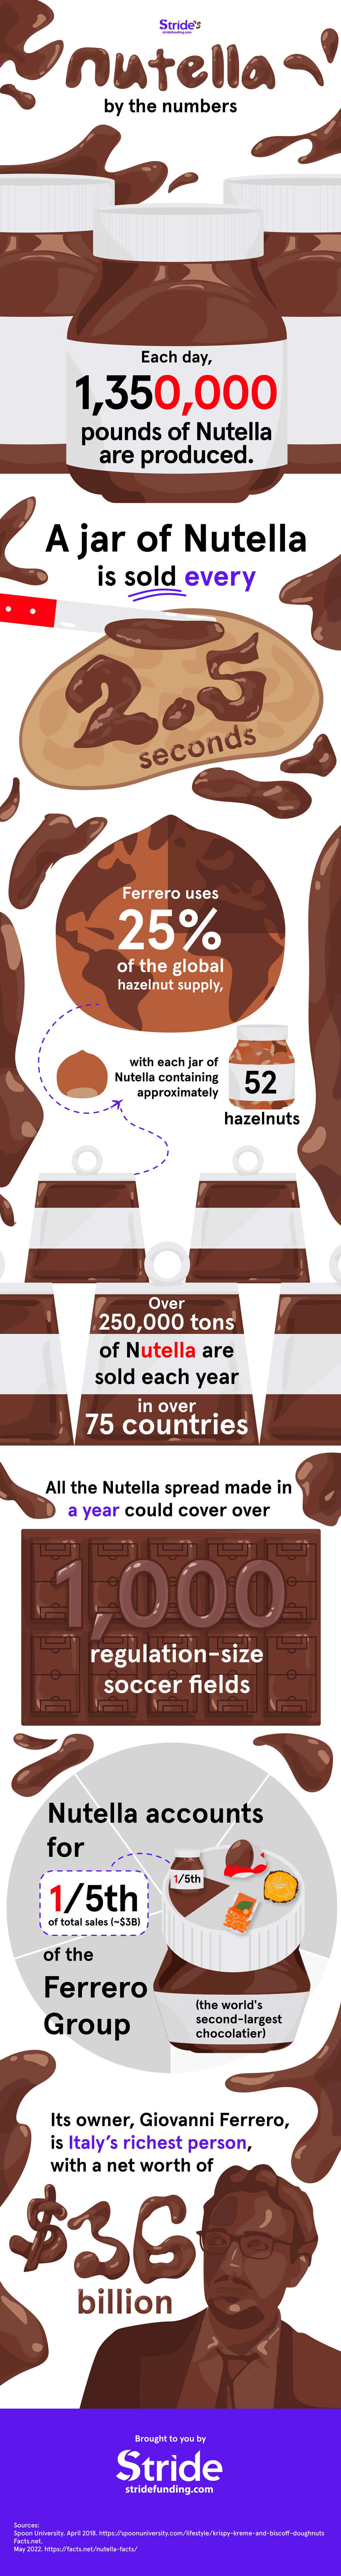 Infographic: Nutella by the Numbers